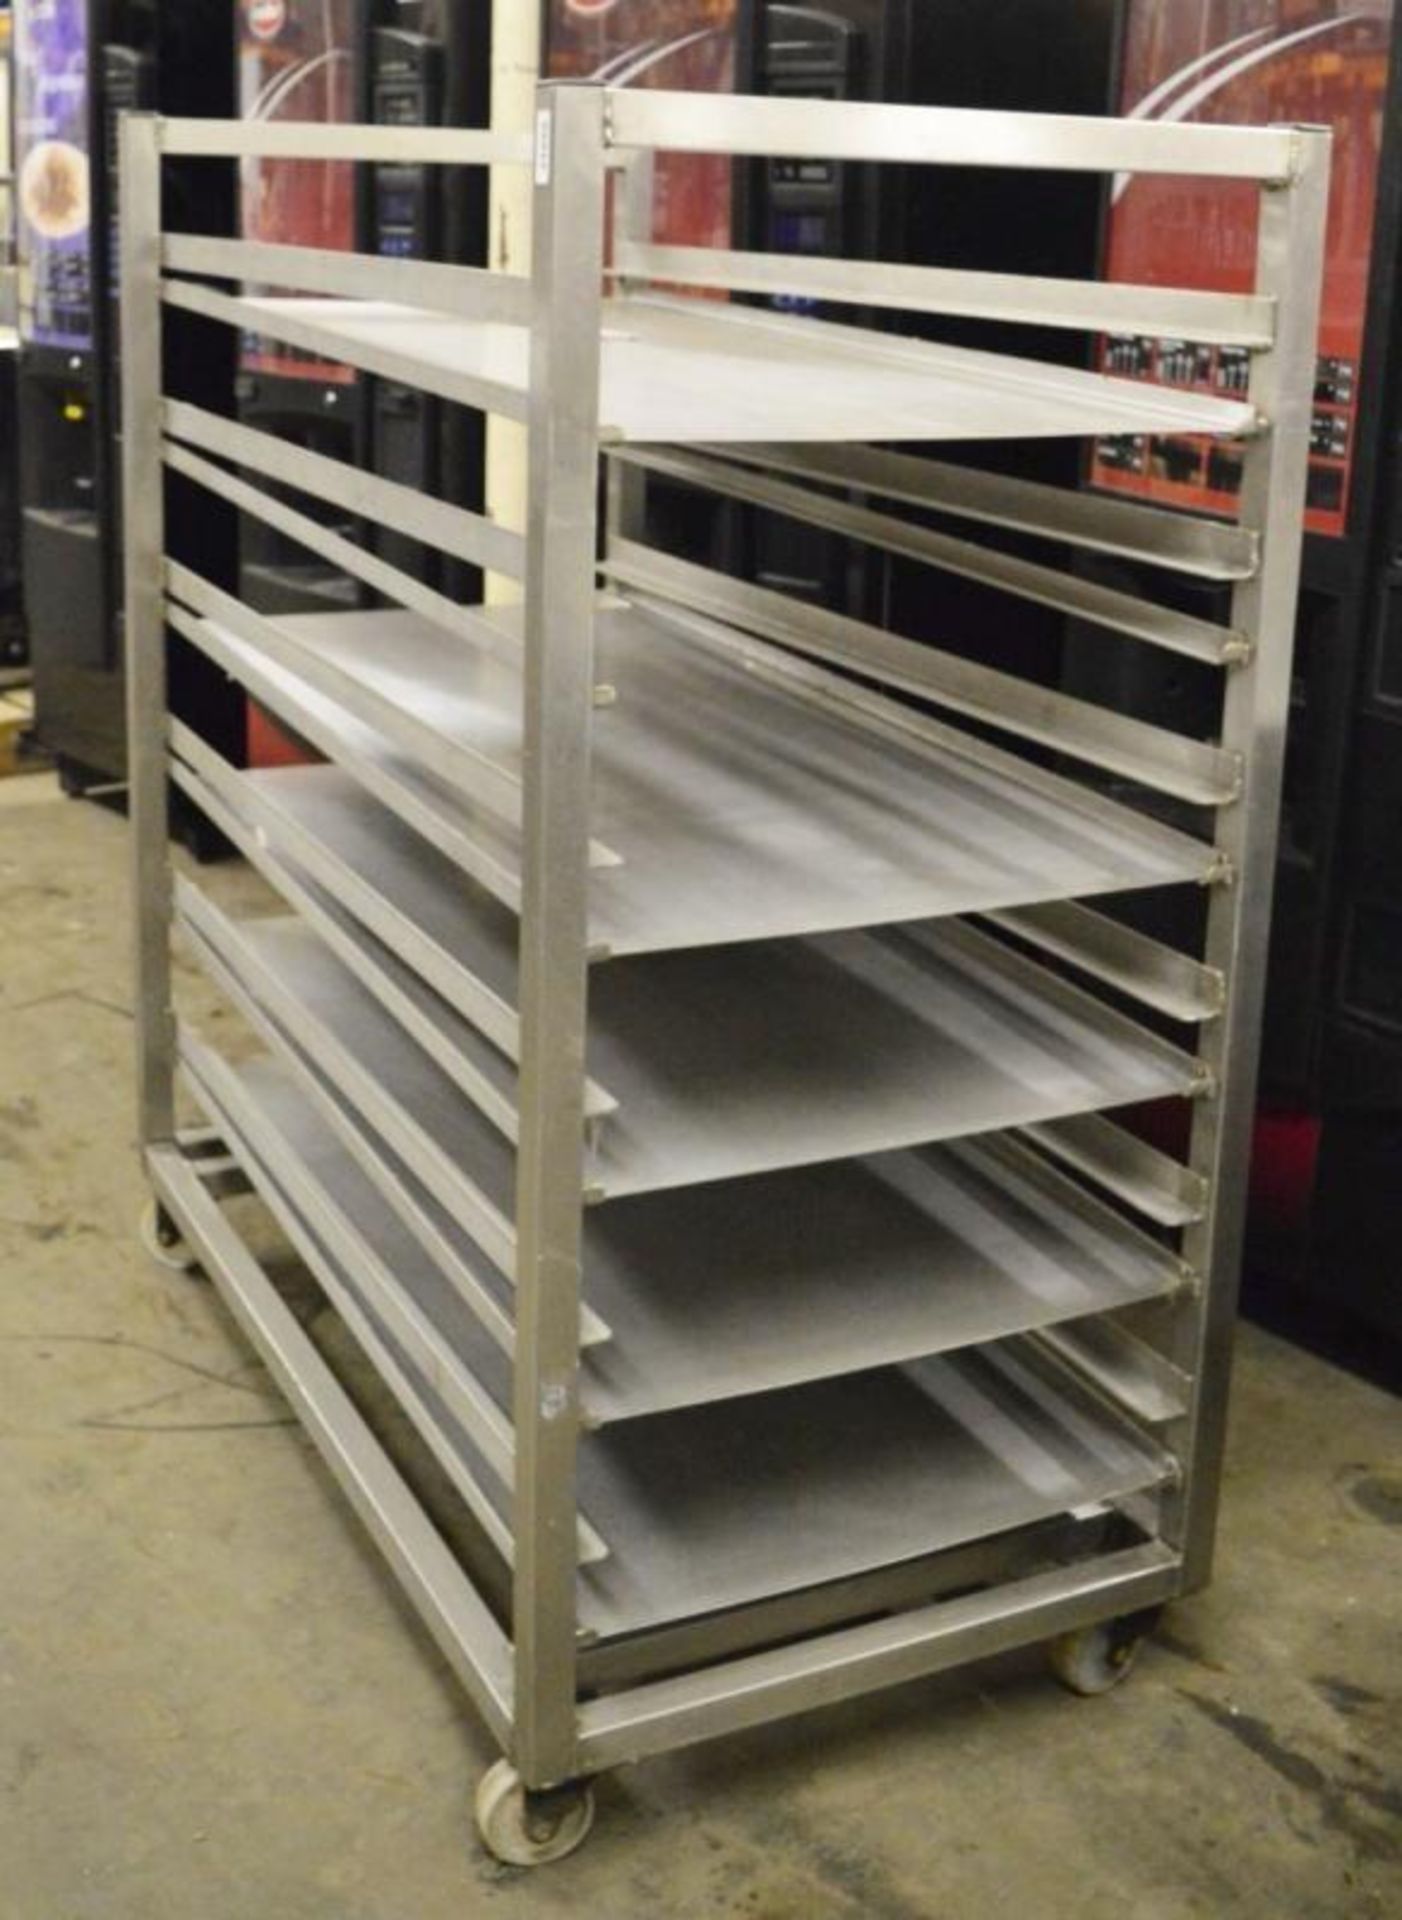 1 x Six Tier Commercial Kitchen Tray Trolley For Baking, Pastries and Other Foods - H148 x W70 x D13 - Image 2 of 3